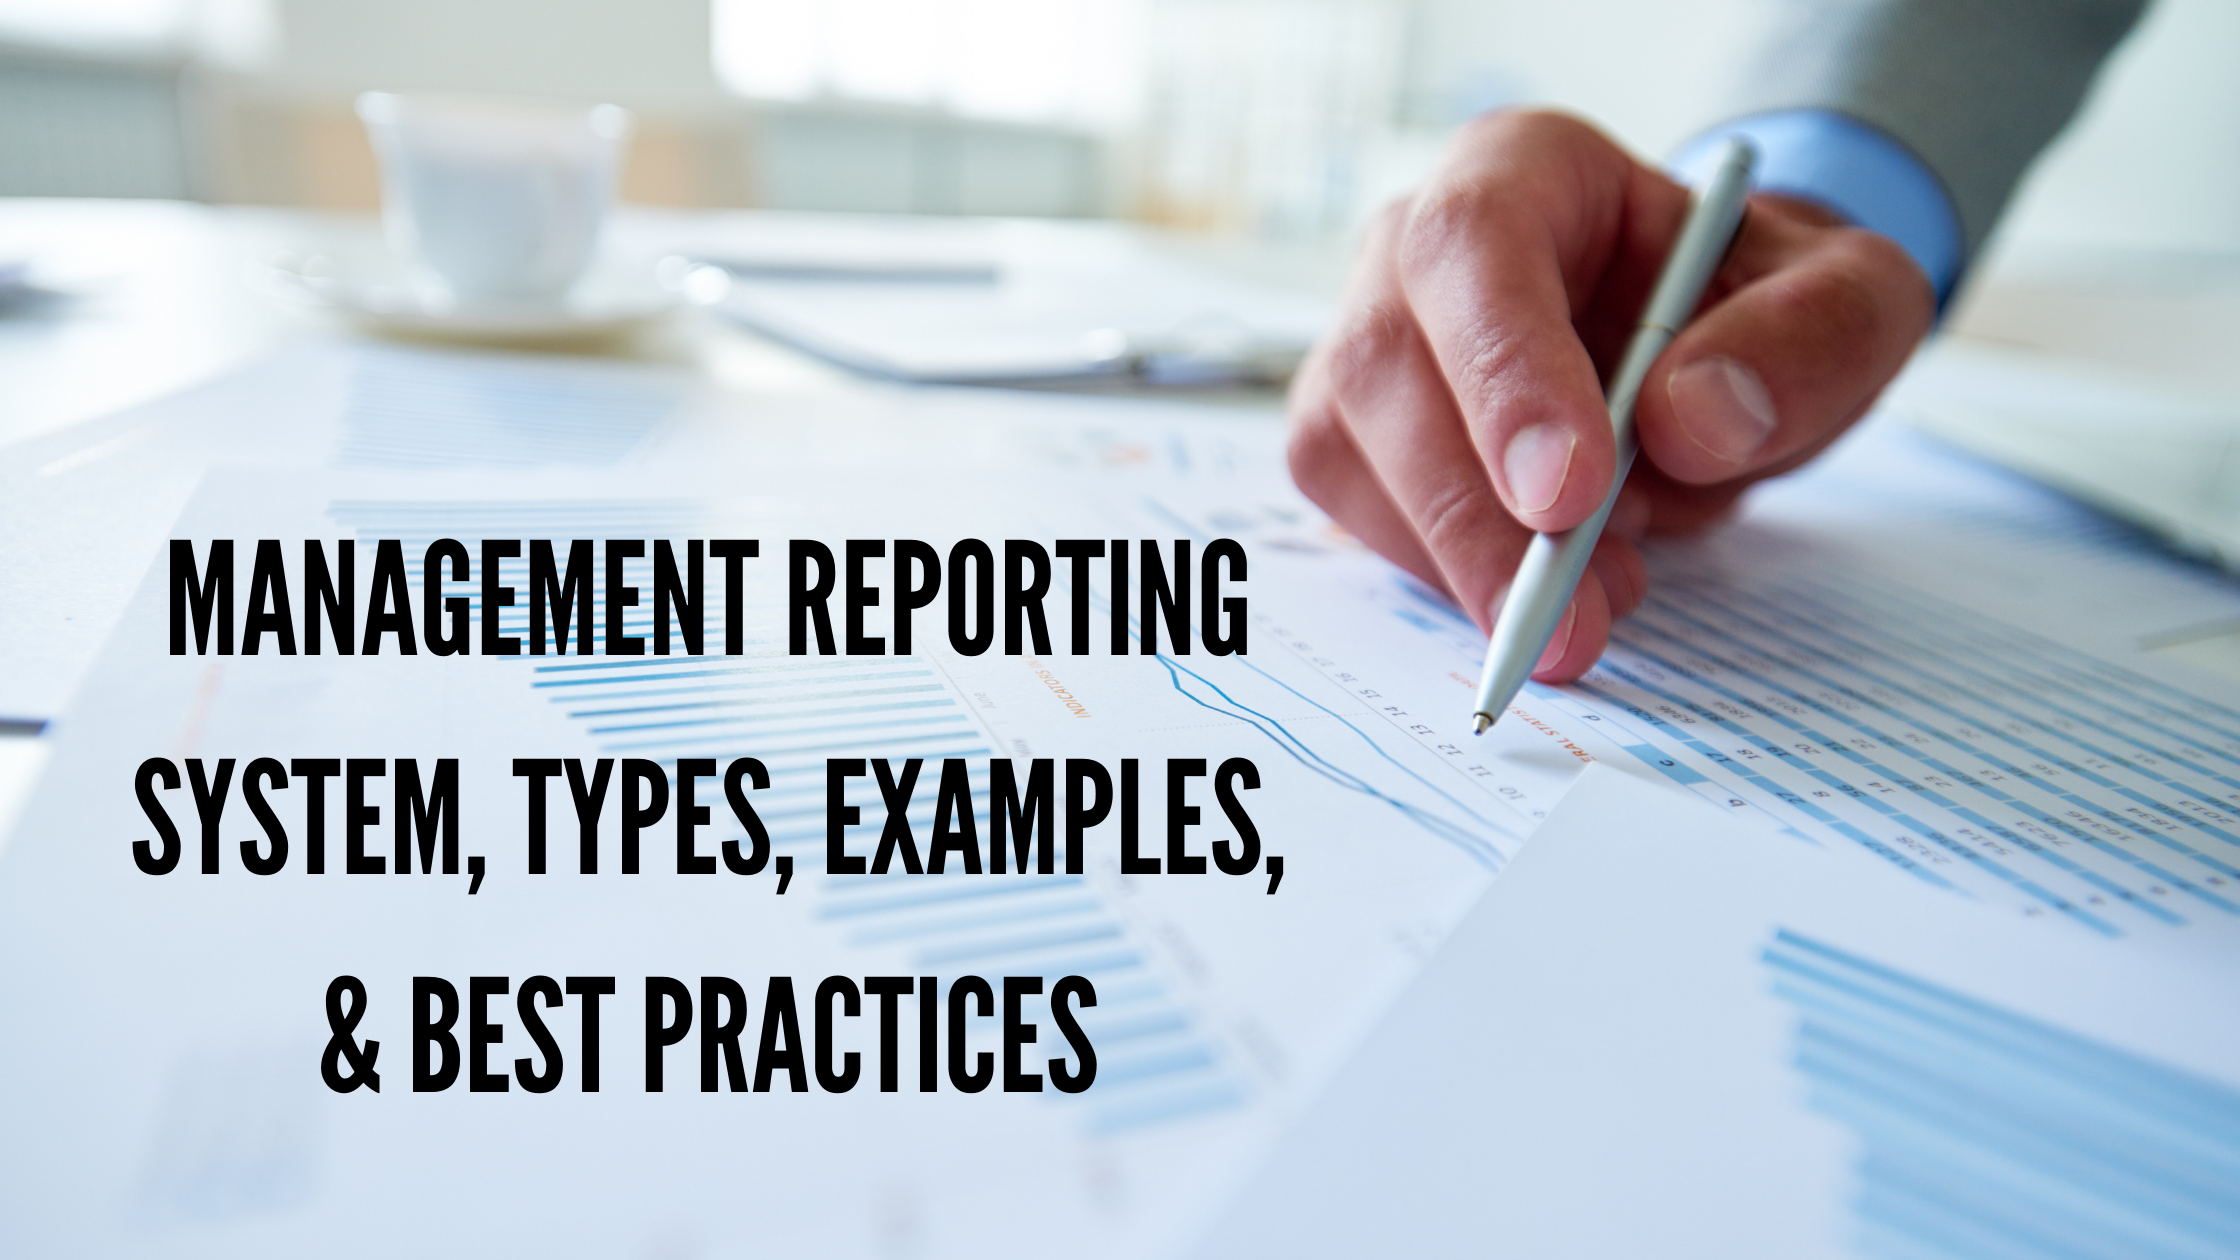 Management Reporting System, Types, Examples, & Best Practices - Folio3 Dynamics Blog